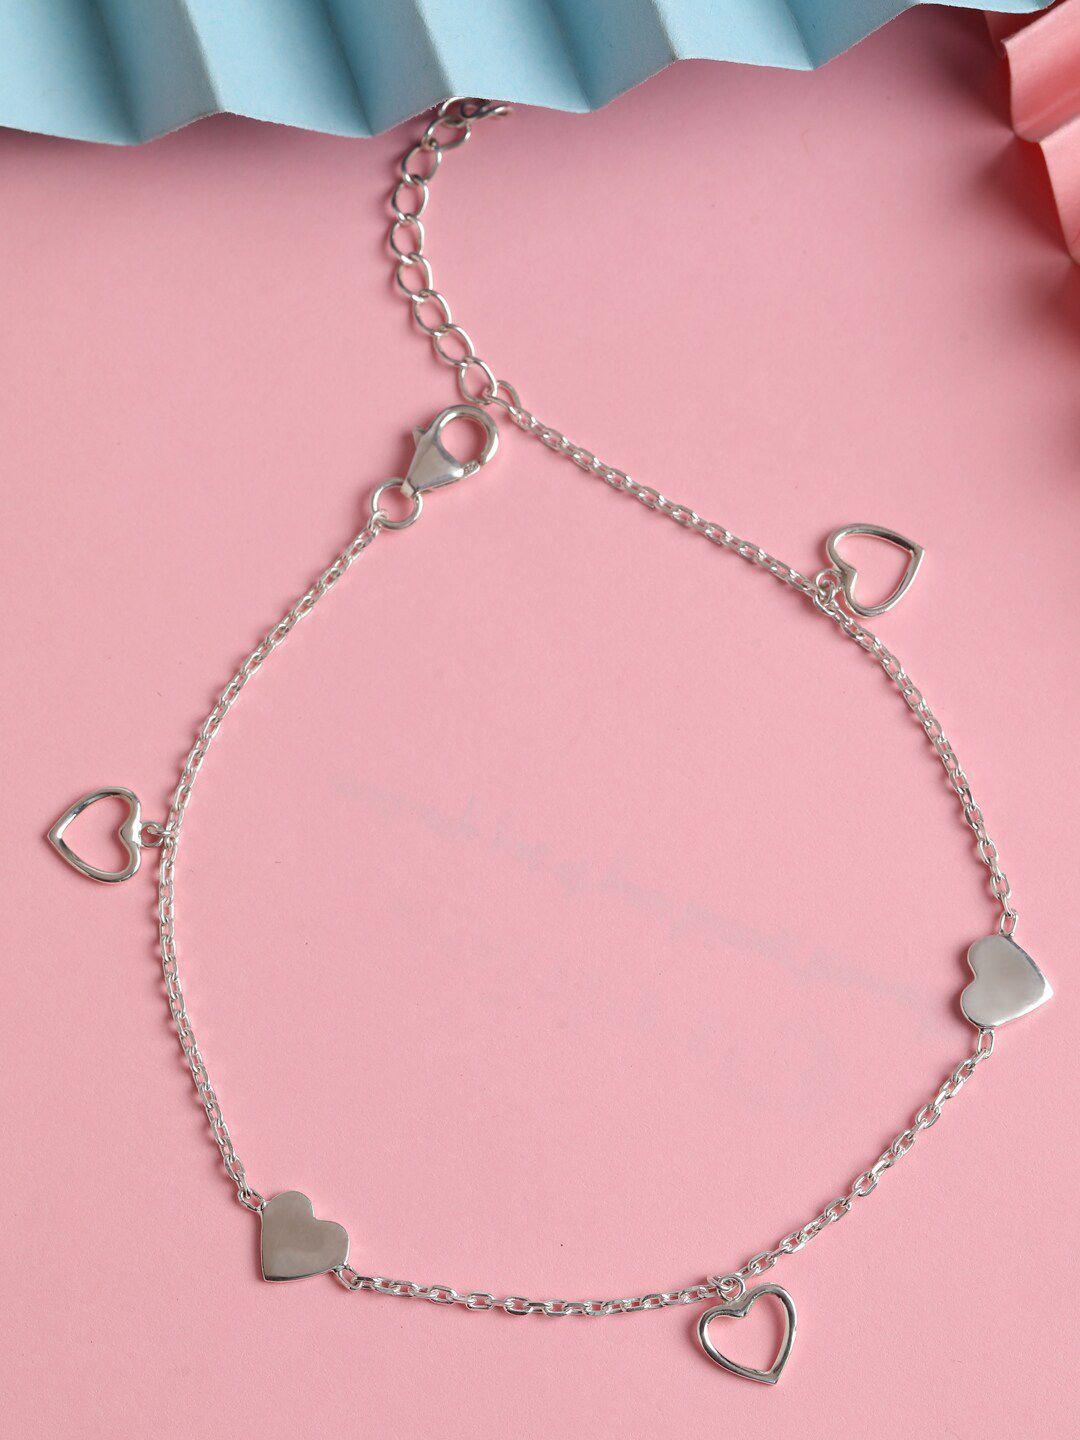 clara women 92.5 sterling silver-plated heart-charm anklet